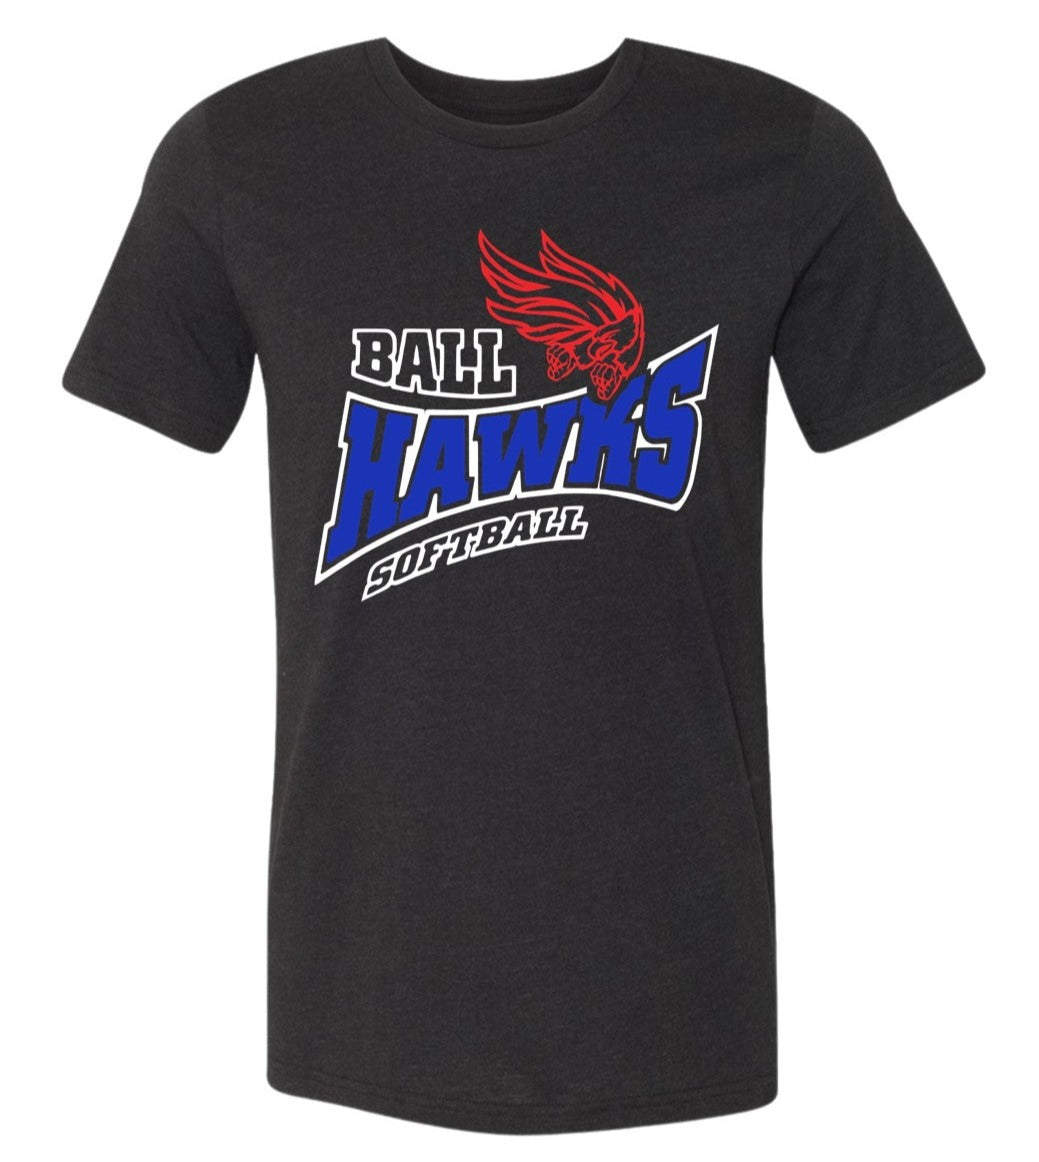 Ballhawks Black shirt with White outline - Lots of style options!